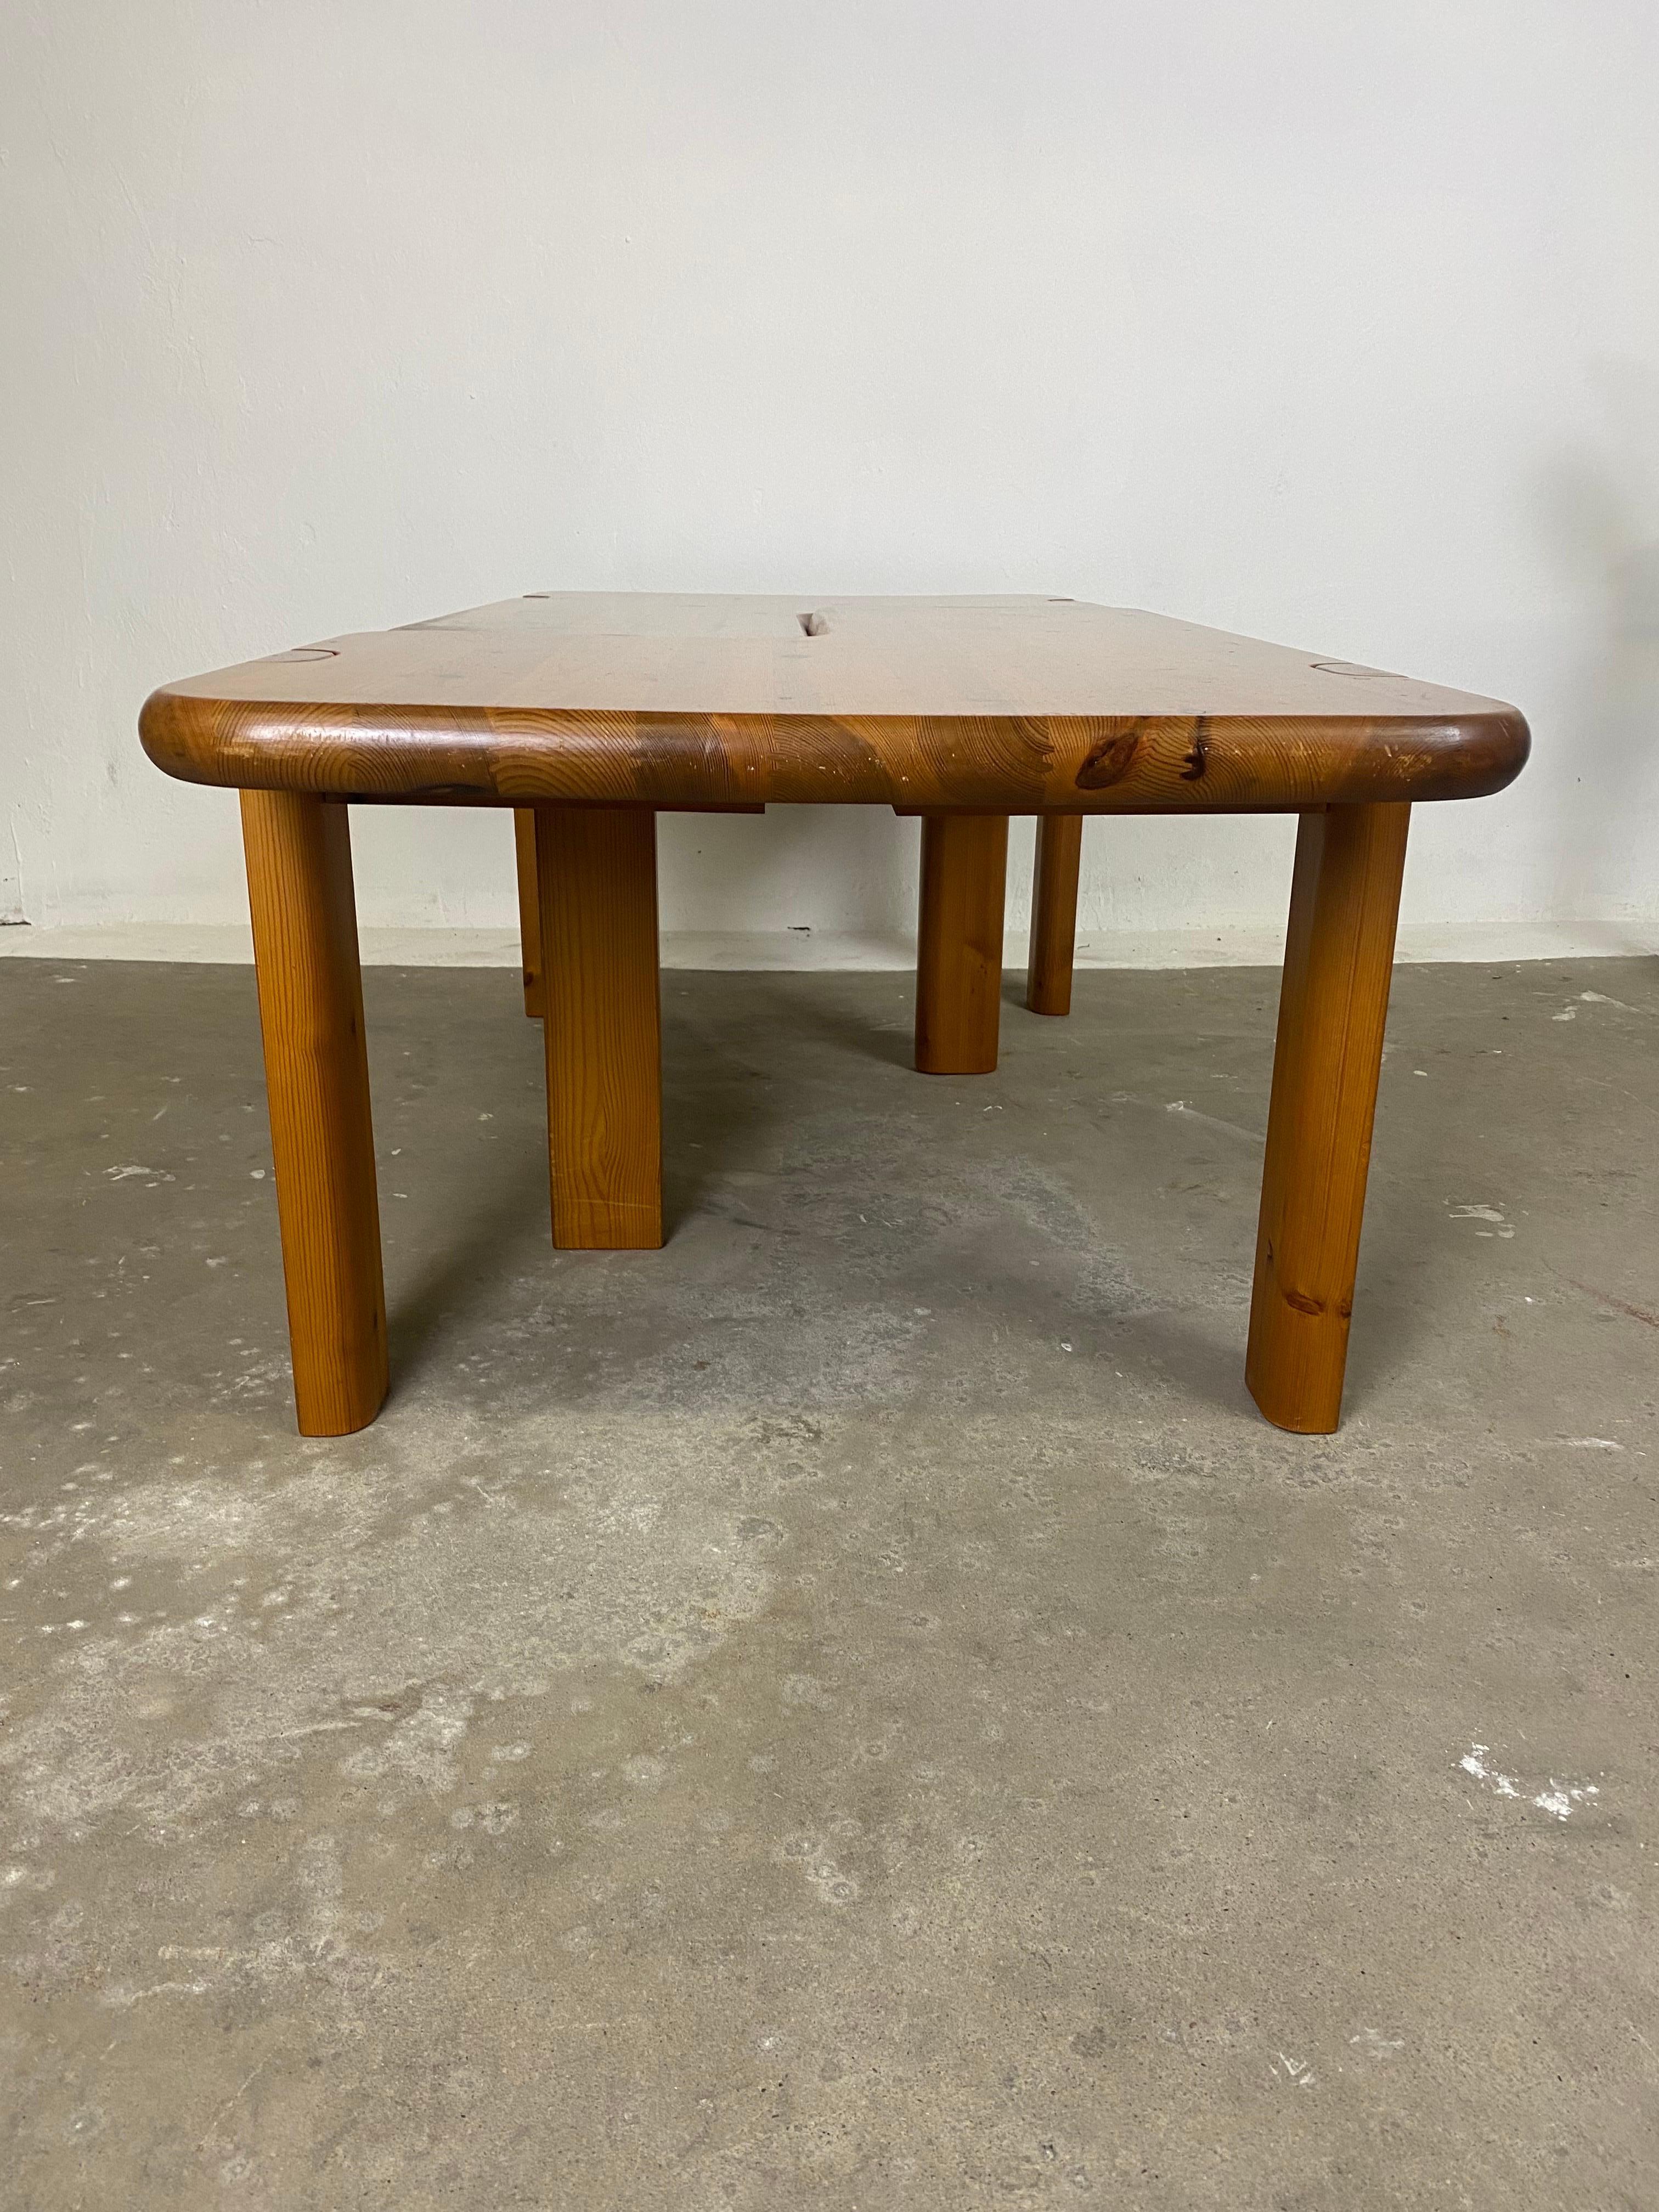 Set of 2 Midcentury Coffeetables by Aksel Kjersgaard for Odder Furniture 1970s For Sale 1